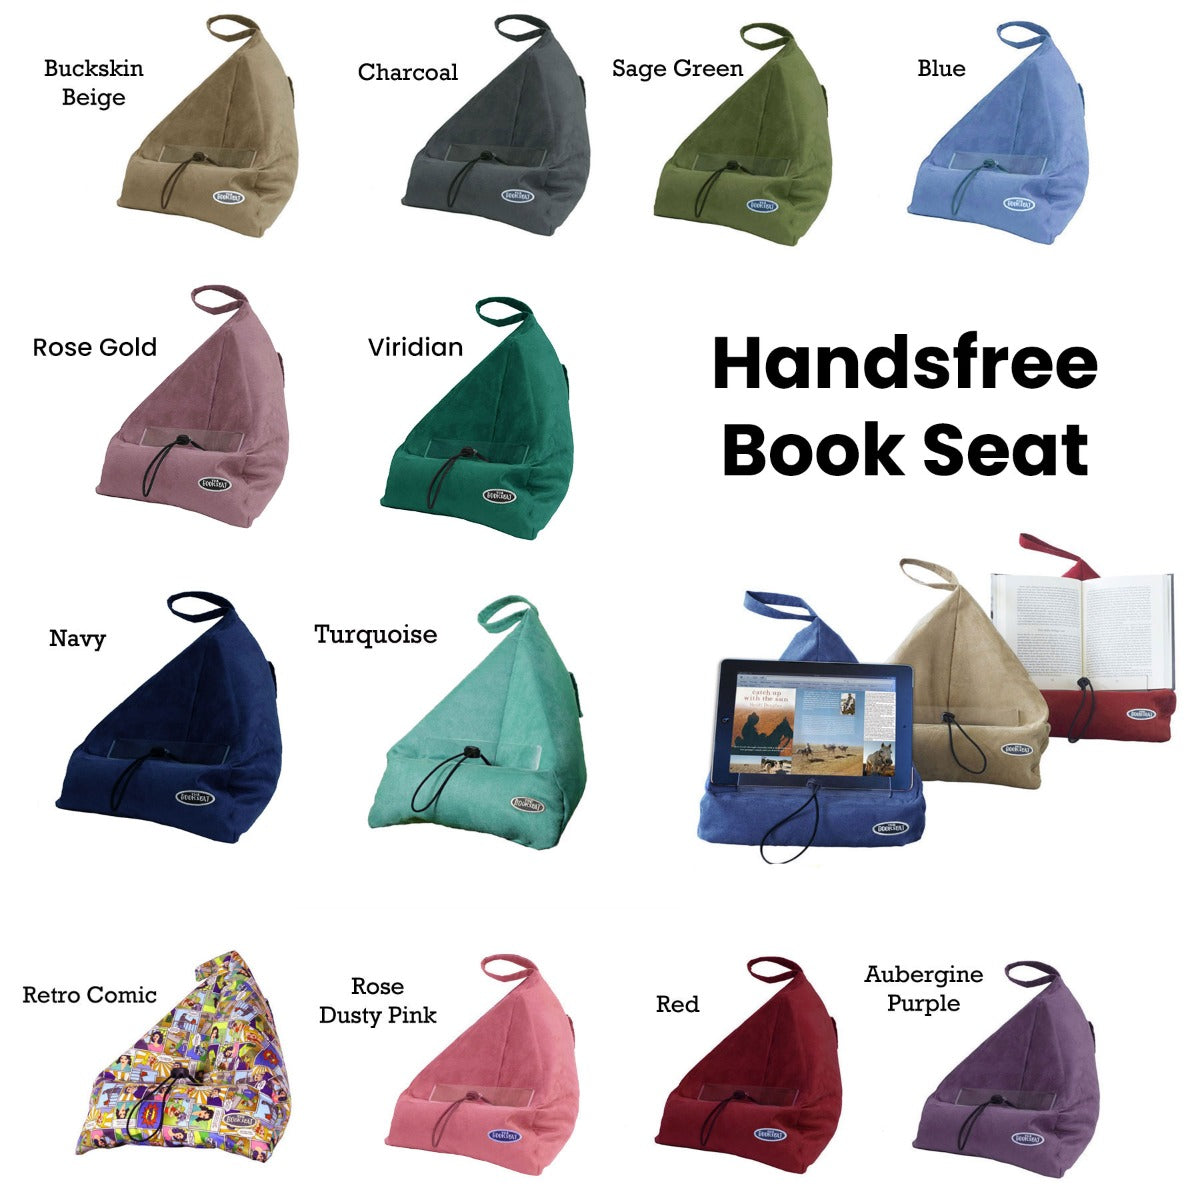 Handsfree Printed Book Seat Book Tablet and iPad Holder Retro Comic